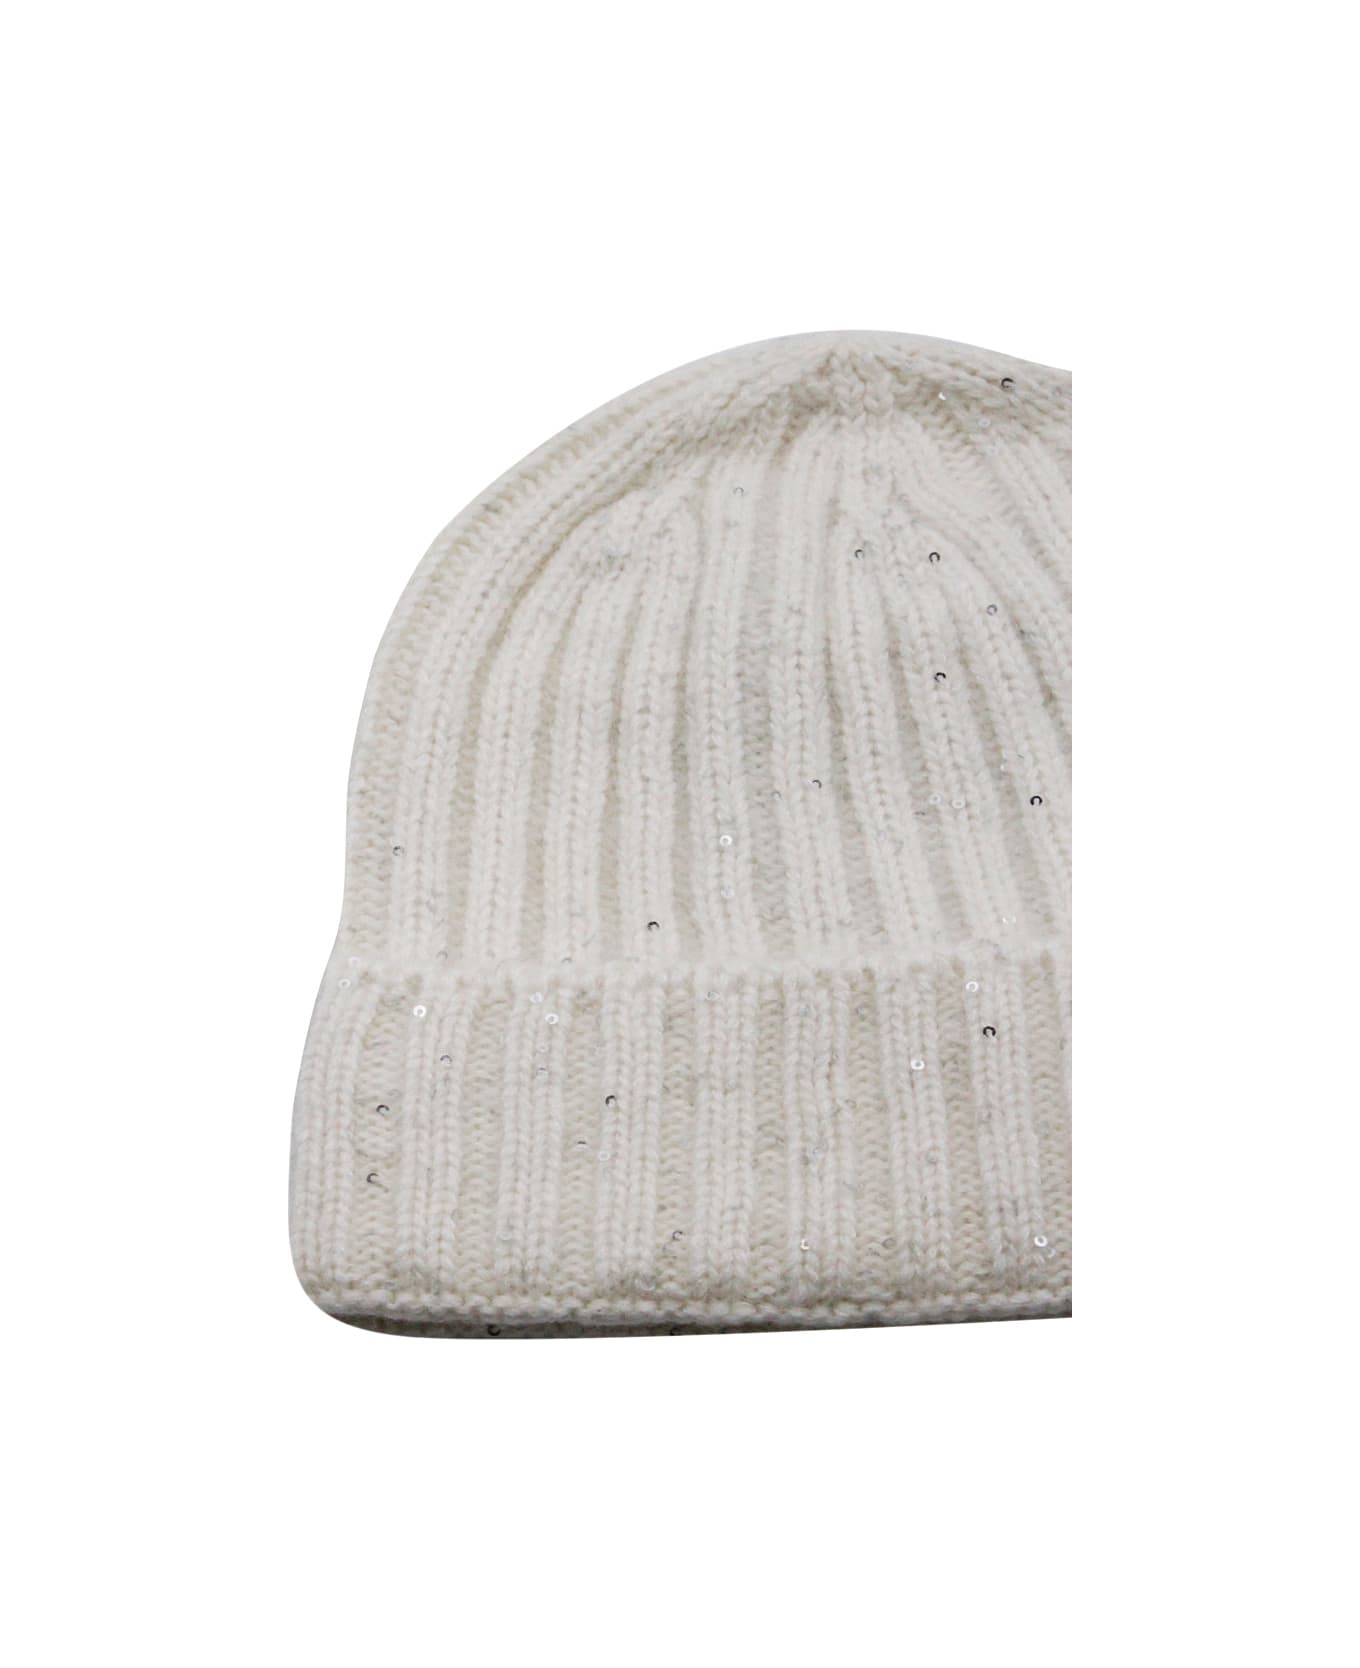 Fabiana Filippi Cap In Soft Wool, Silk And Cashmere Embellished With Micro Sequins - White 帽子